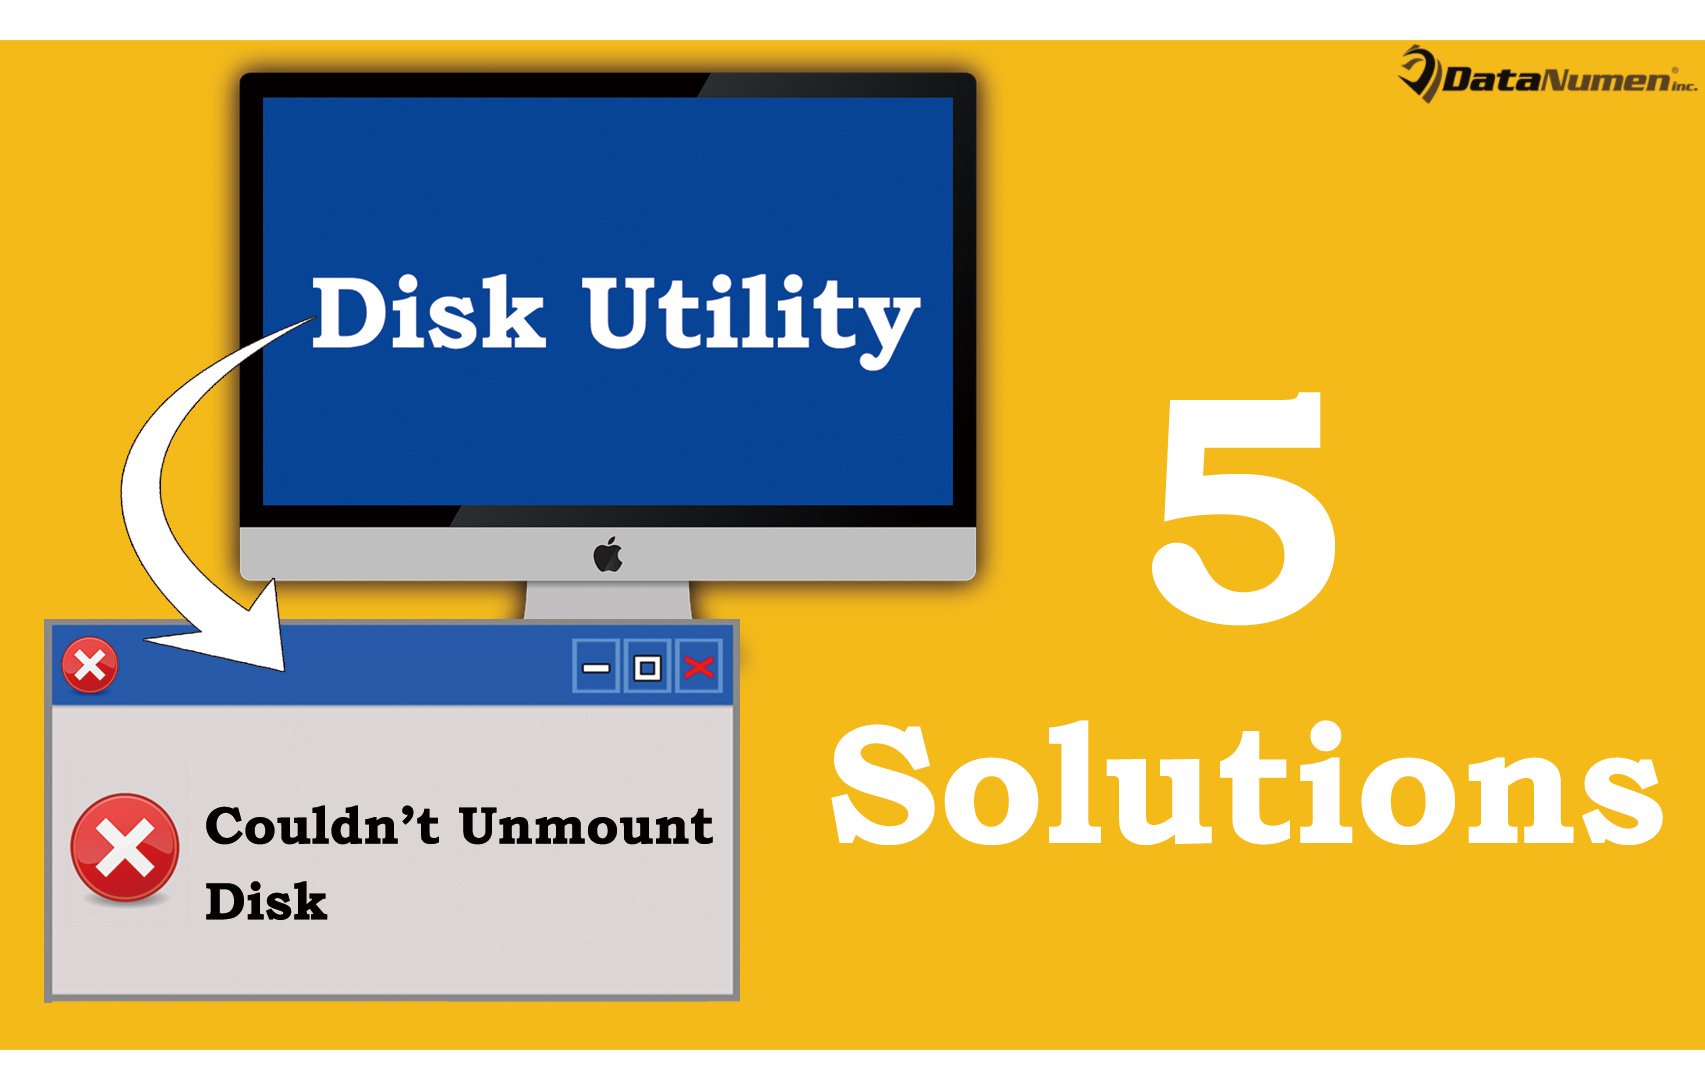 5 Solutions to "Couldn’t Unmount Disk" Error when Using Disk Utility on Mac